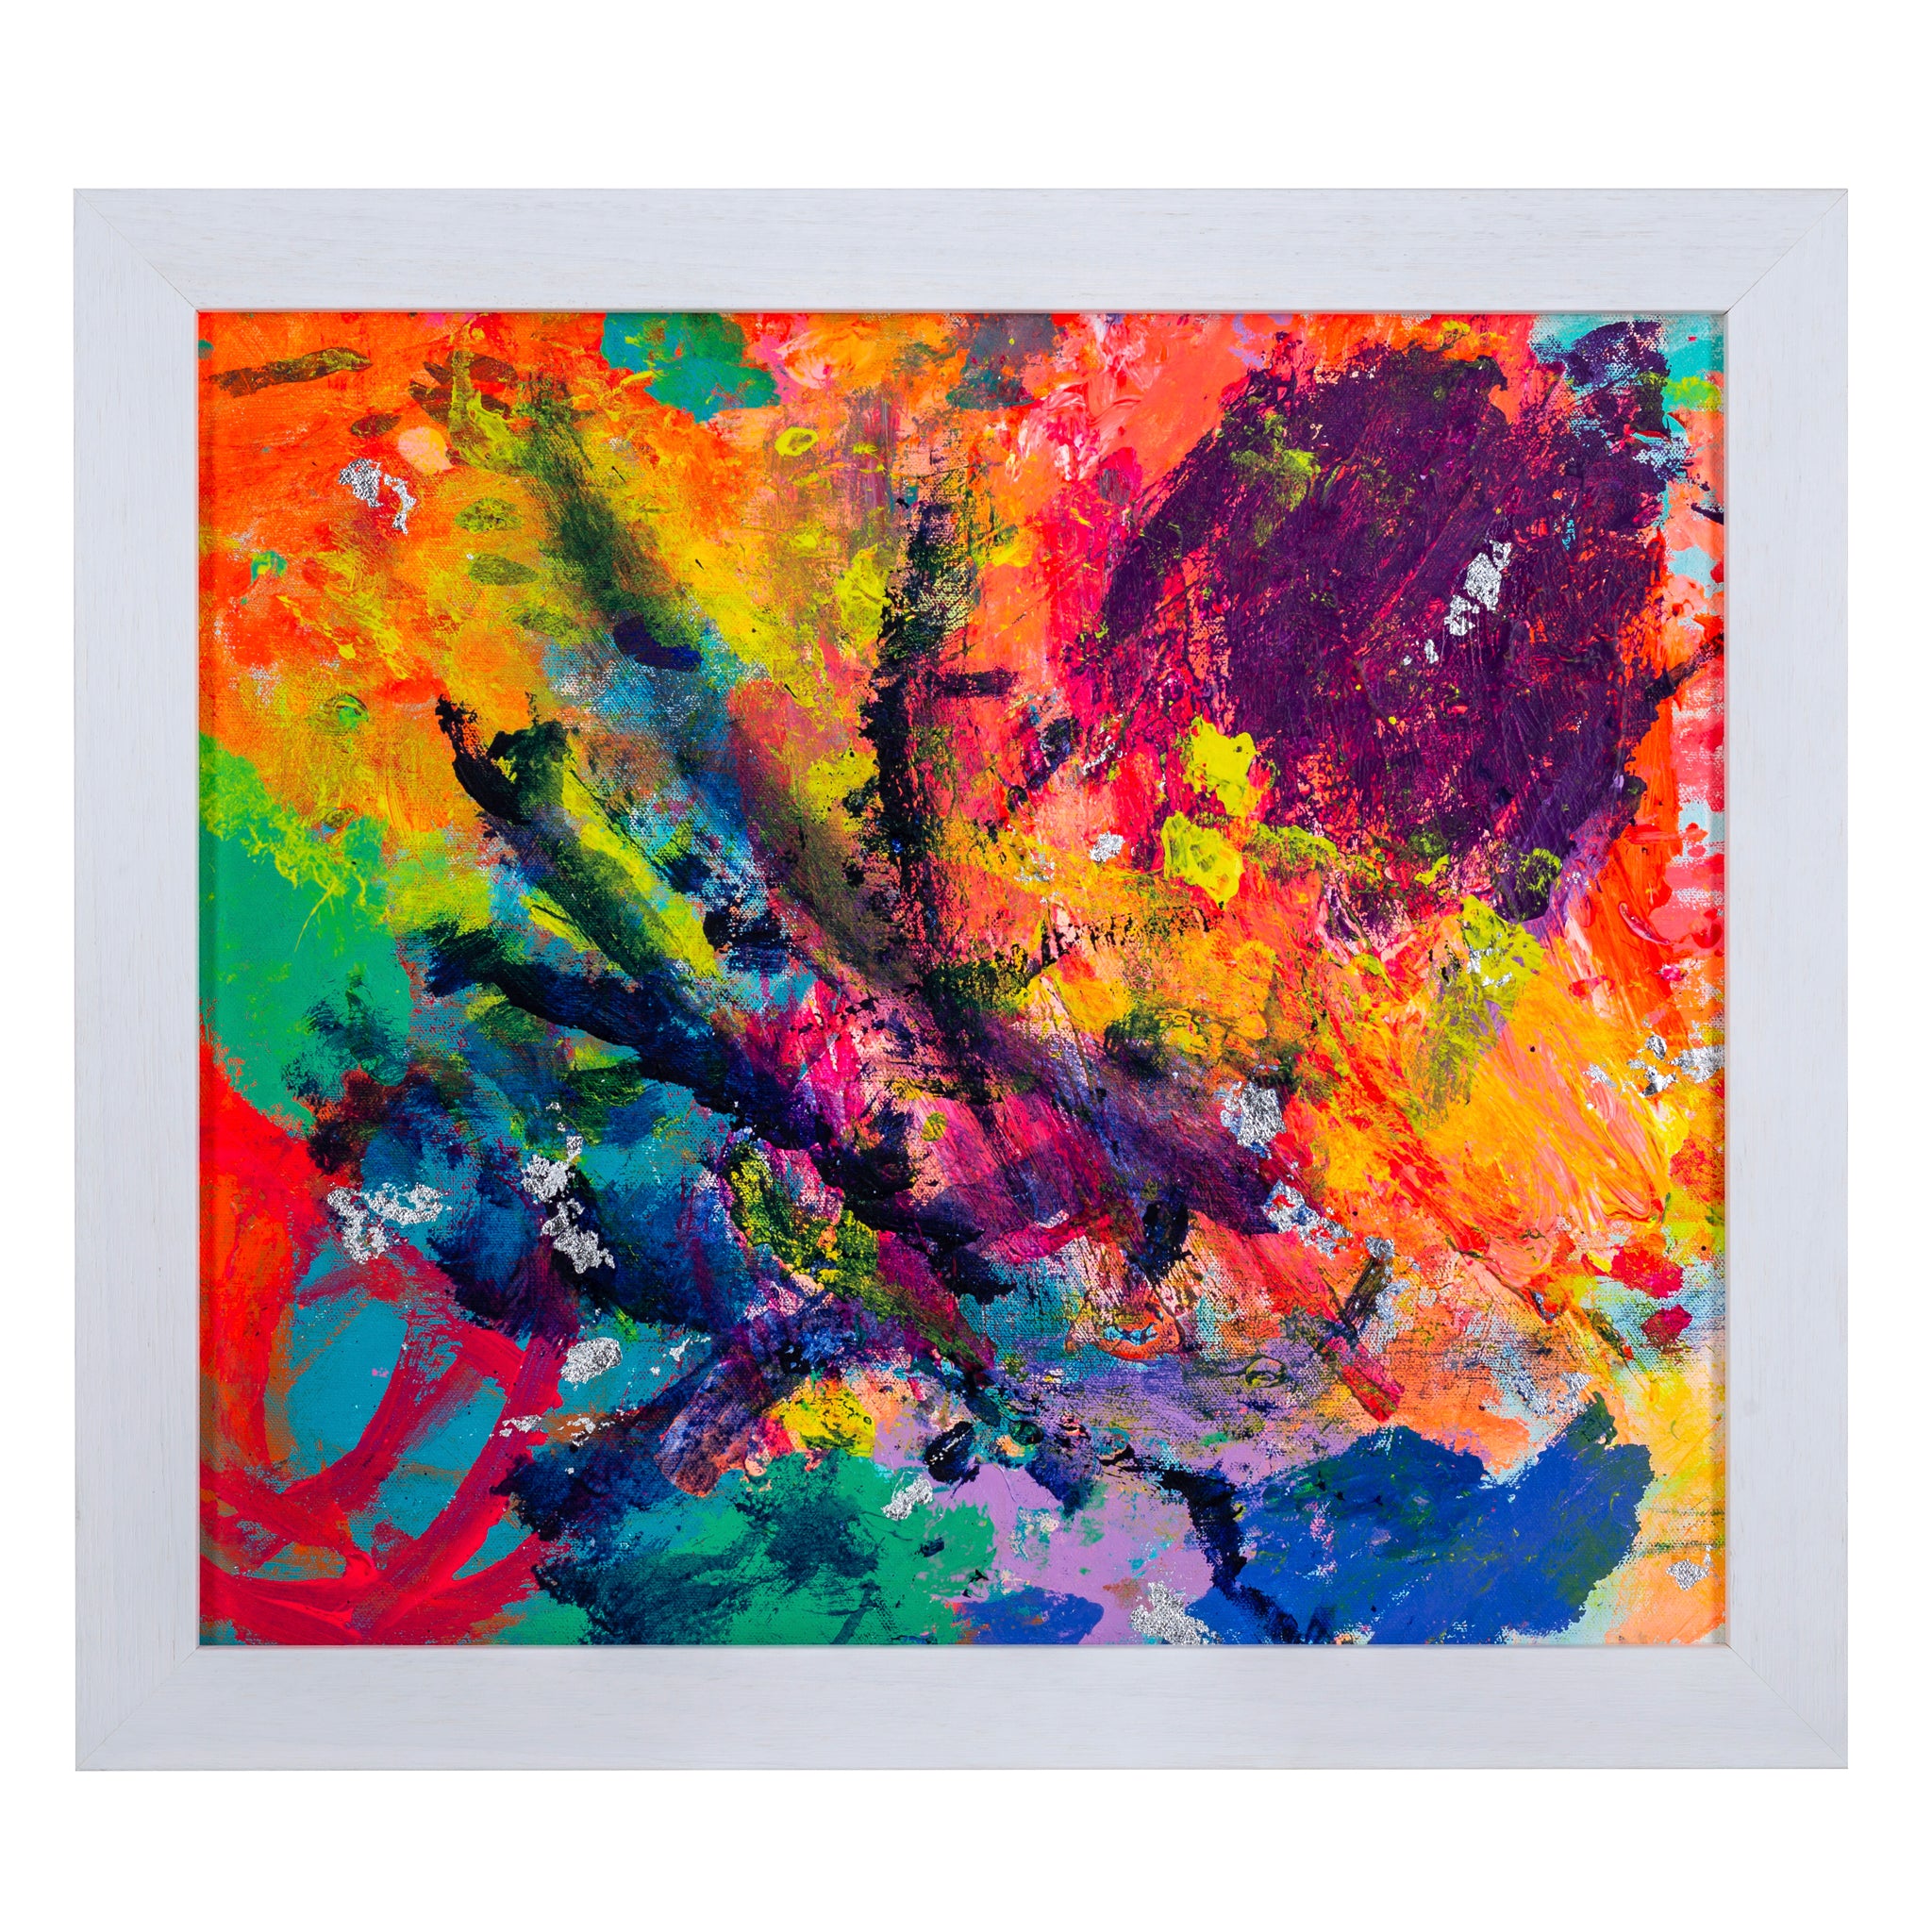 Framed bright coloured abstract artwork called Sunset in the Clouds